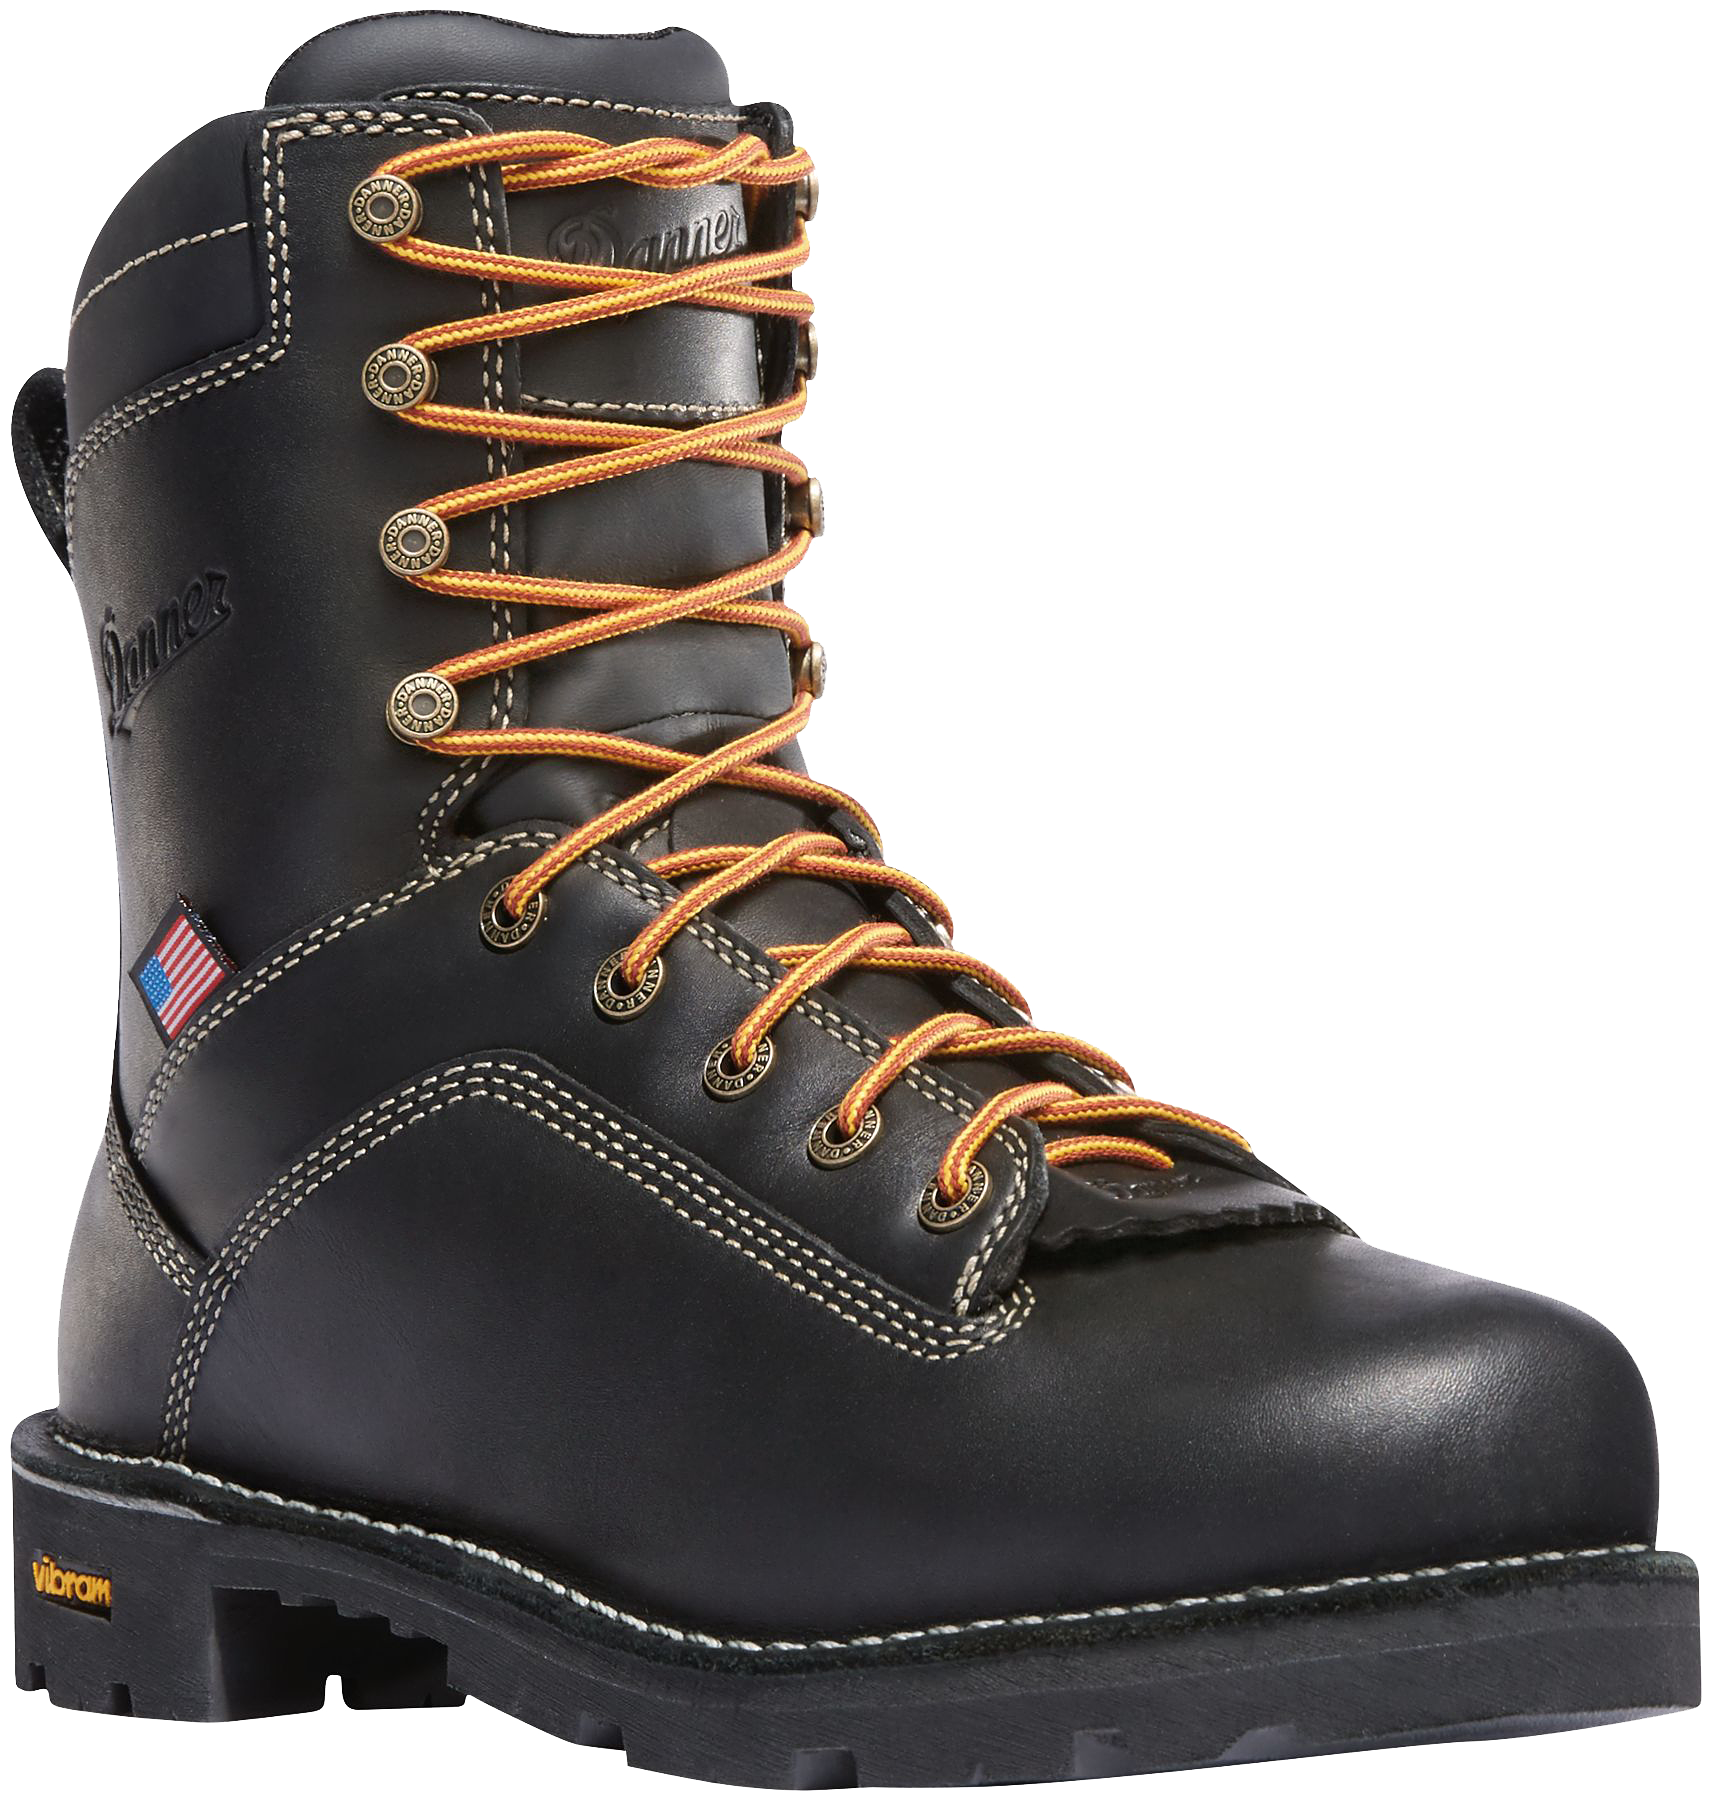 Danner Quarry USA Brown GORE-TEX Alloy Toe Work Boots for Men - Black - 9W